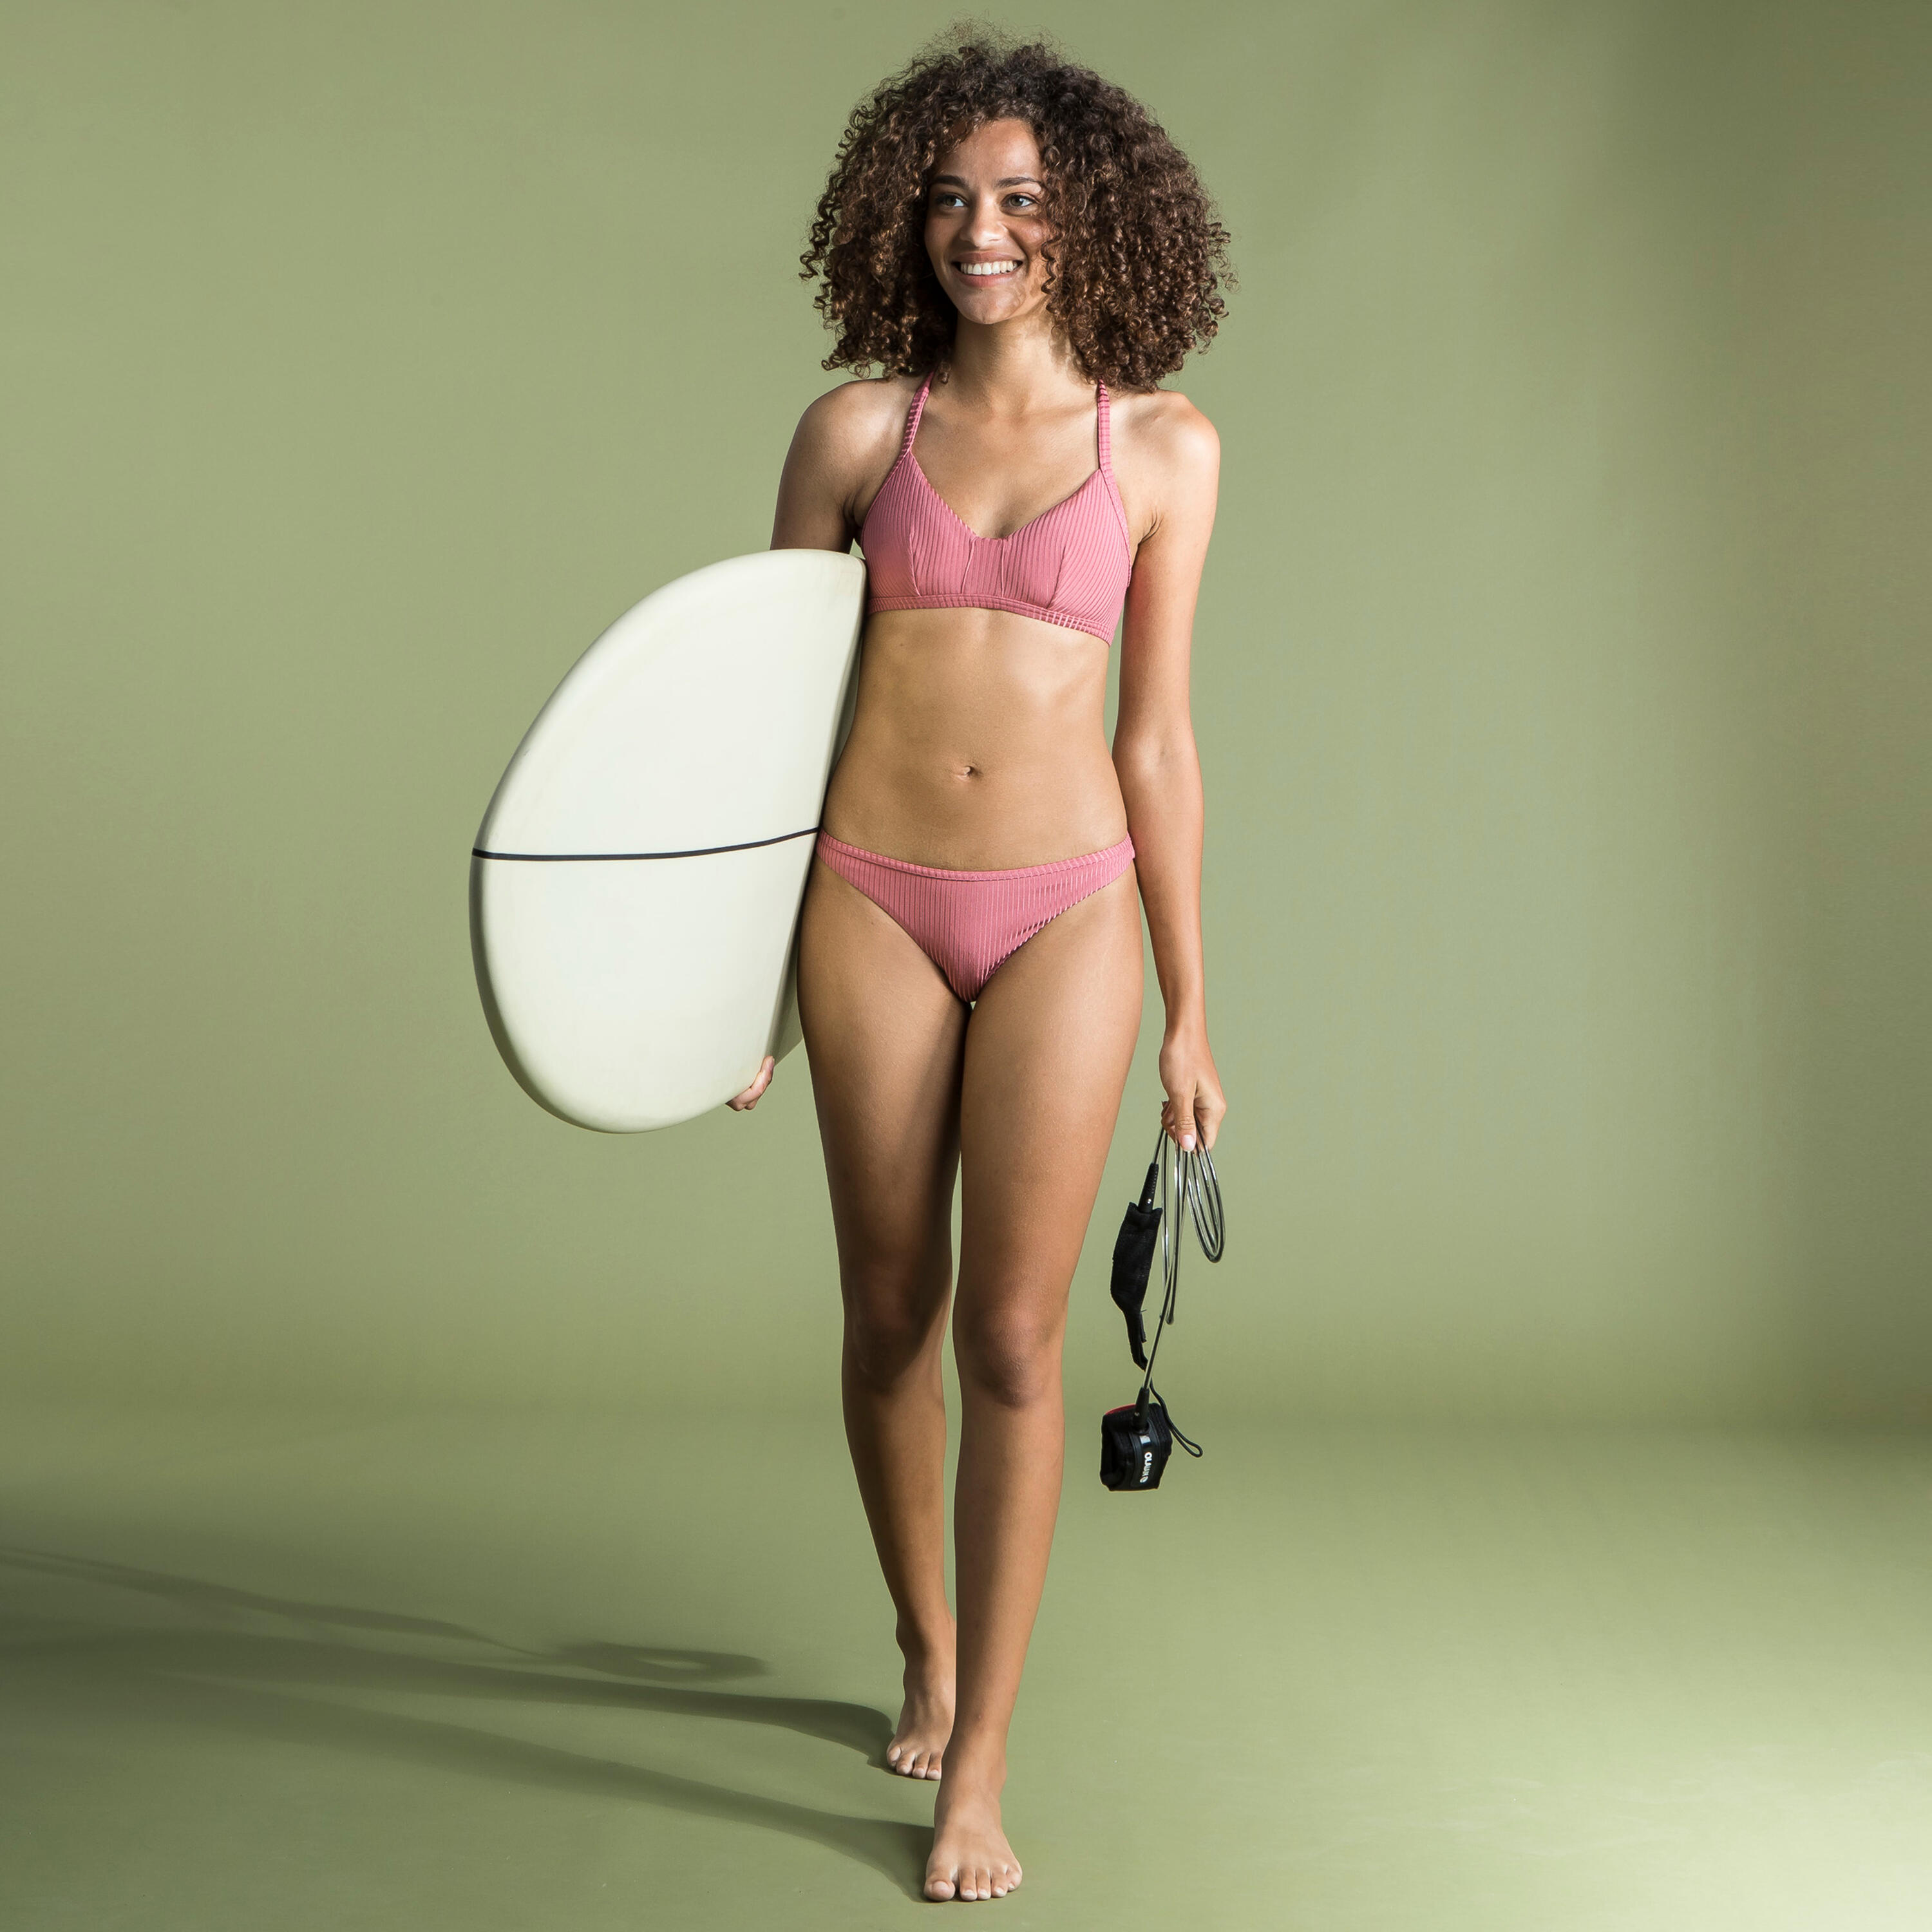 CROP TOP Swimsuit Top with Structured and Adjustable Back CARO - RIBBED PINK 12/13